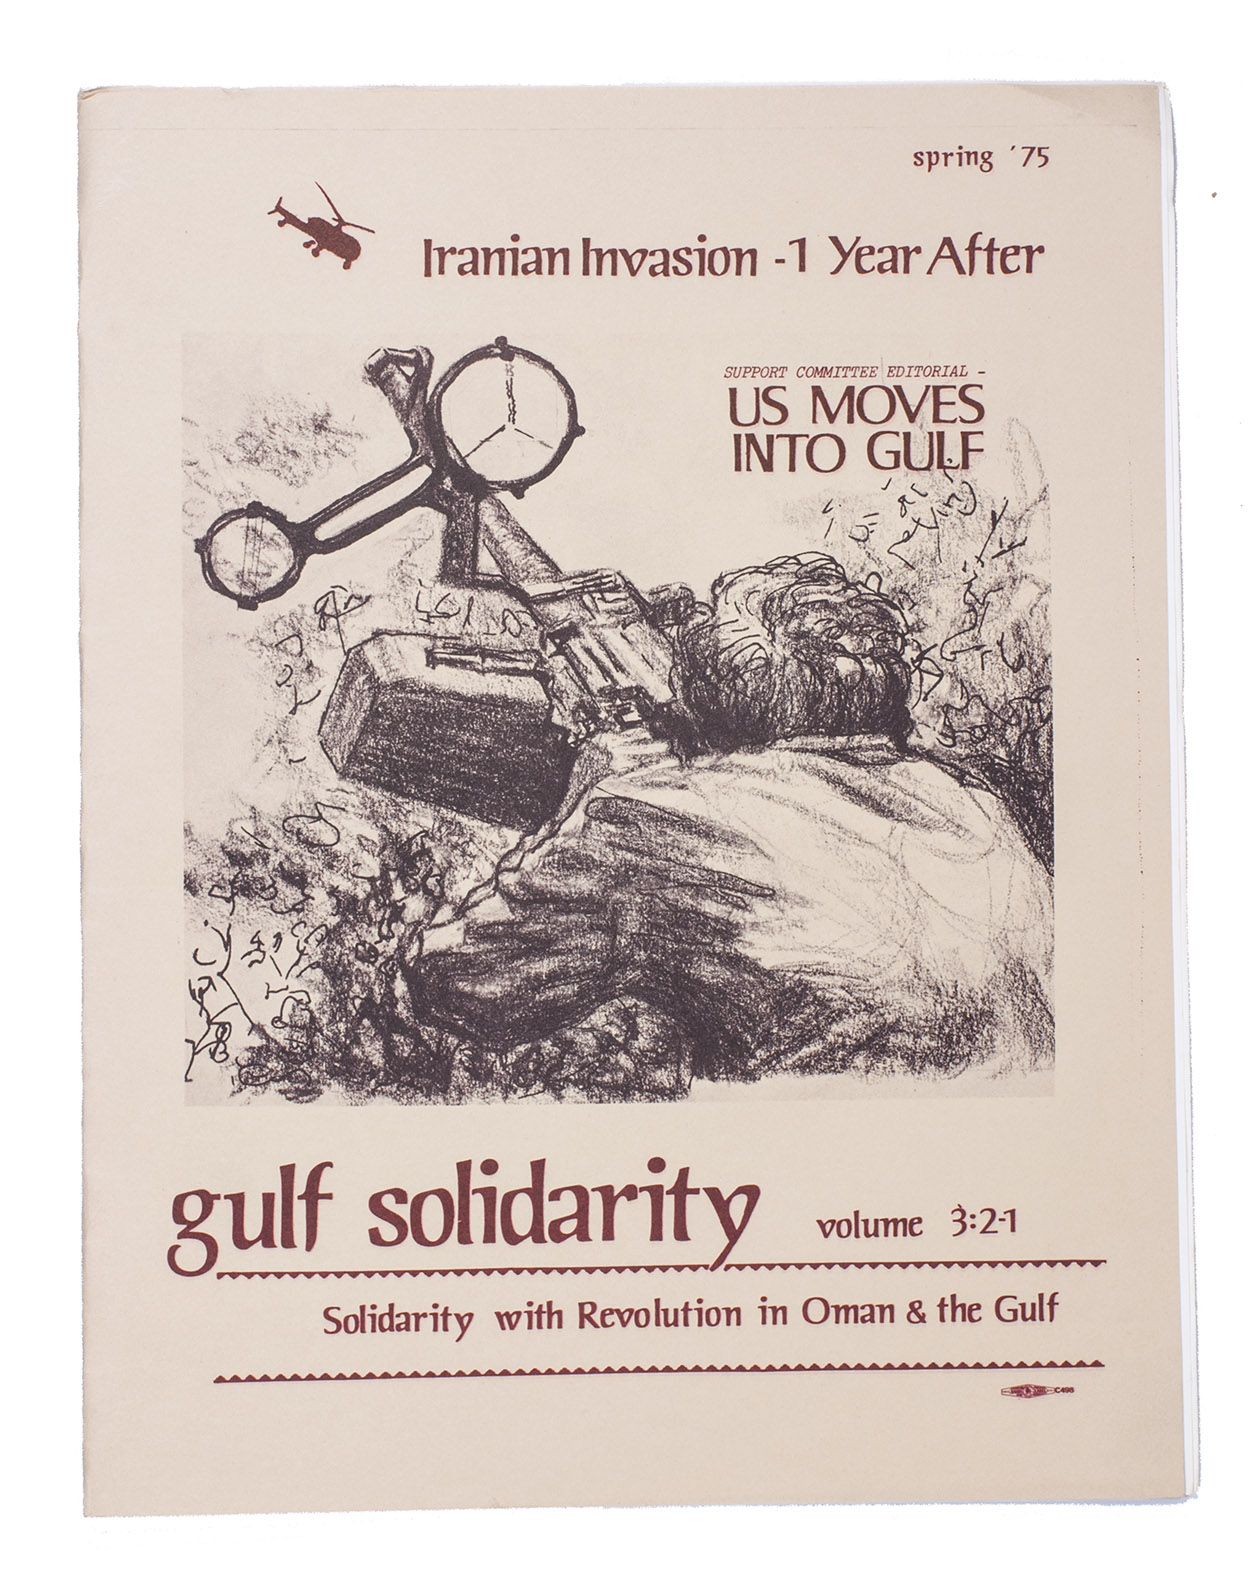 [SUPPORT COMMITTEE FOR THE LIBERATION MOVEMENT IN THE GULF]. - The Gulf Solidarity. Iranian invasion - 1 year after. Volume 3: 2-1.San Francisco, CA, spring 1975. 4to (28 x 21.5 cm). With an illustration on the wrappers and some reproductions of photographs and some maps in the text. Original printed paper wrappers.